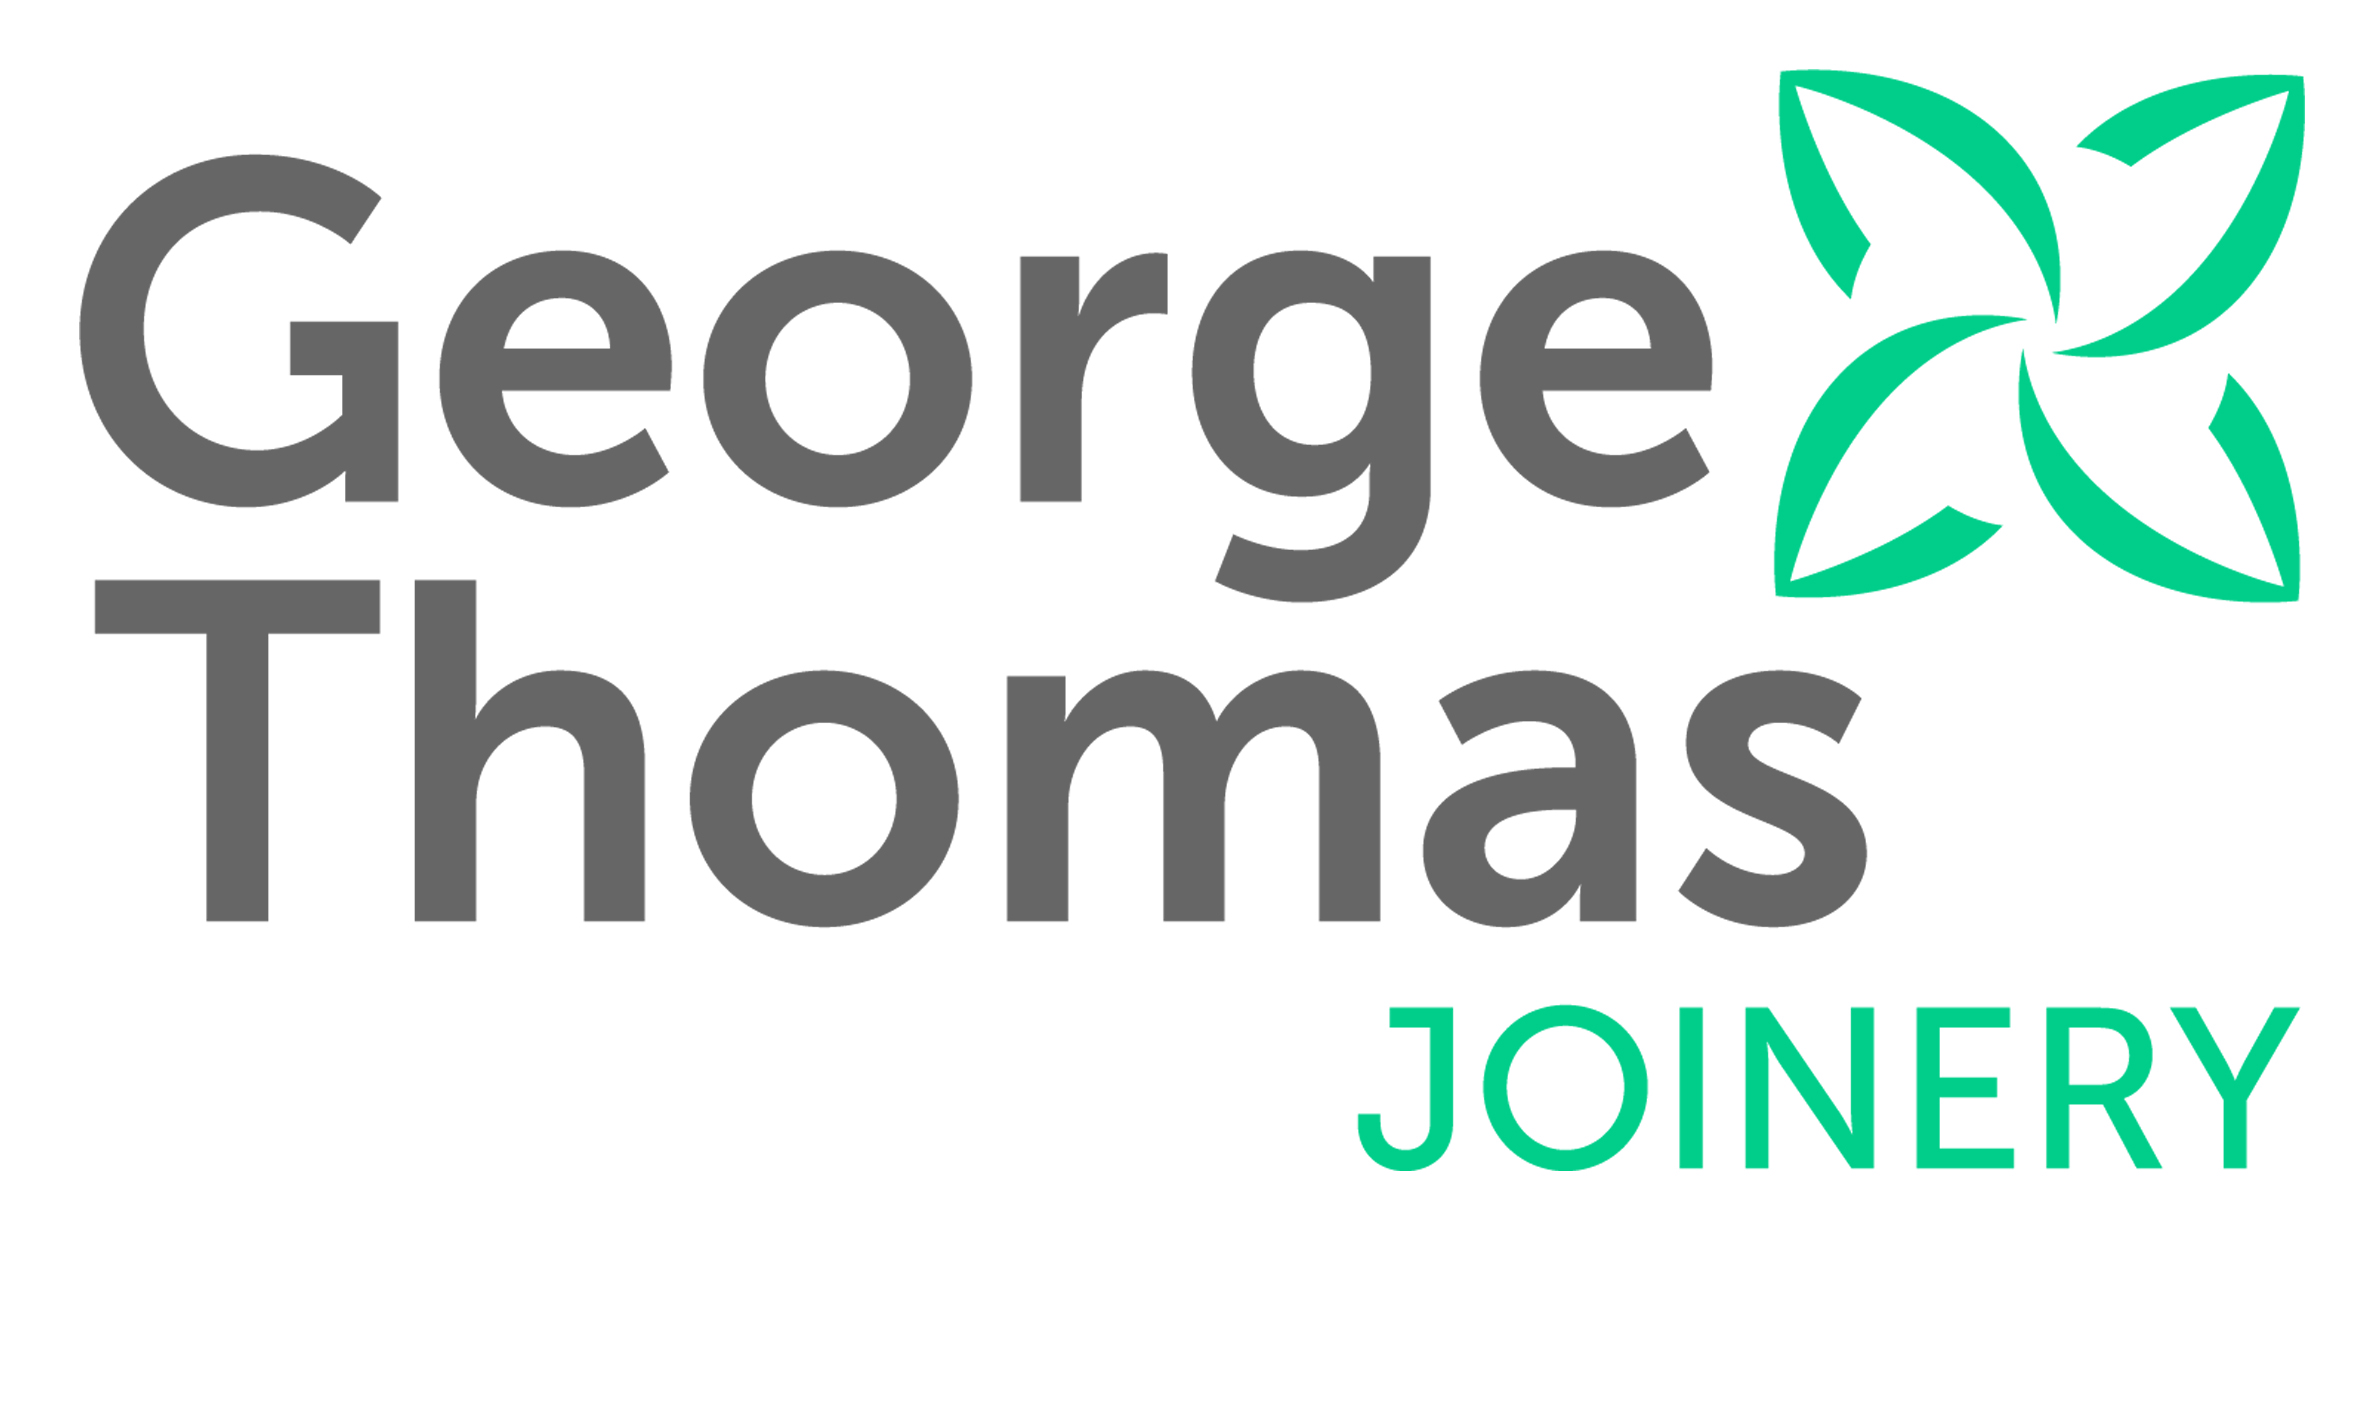 George Thomas Joinery